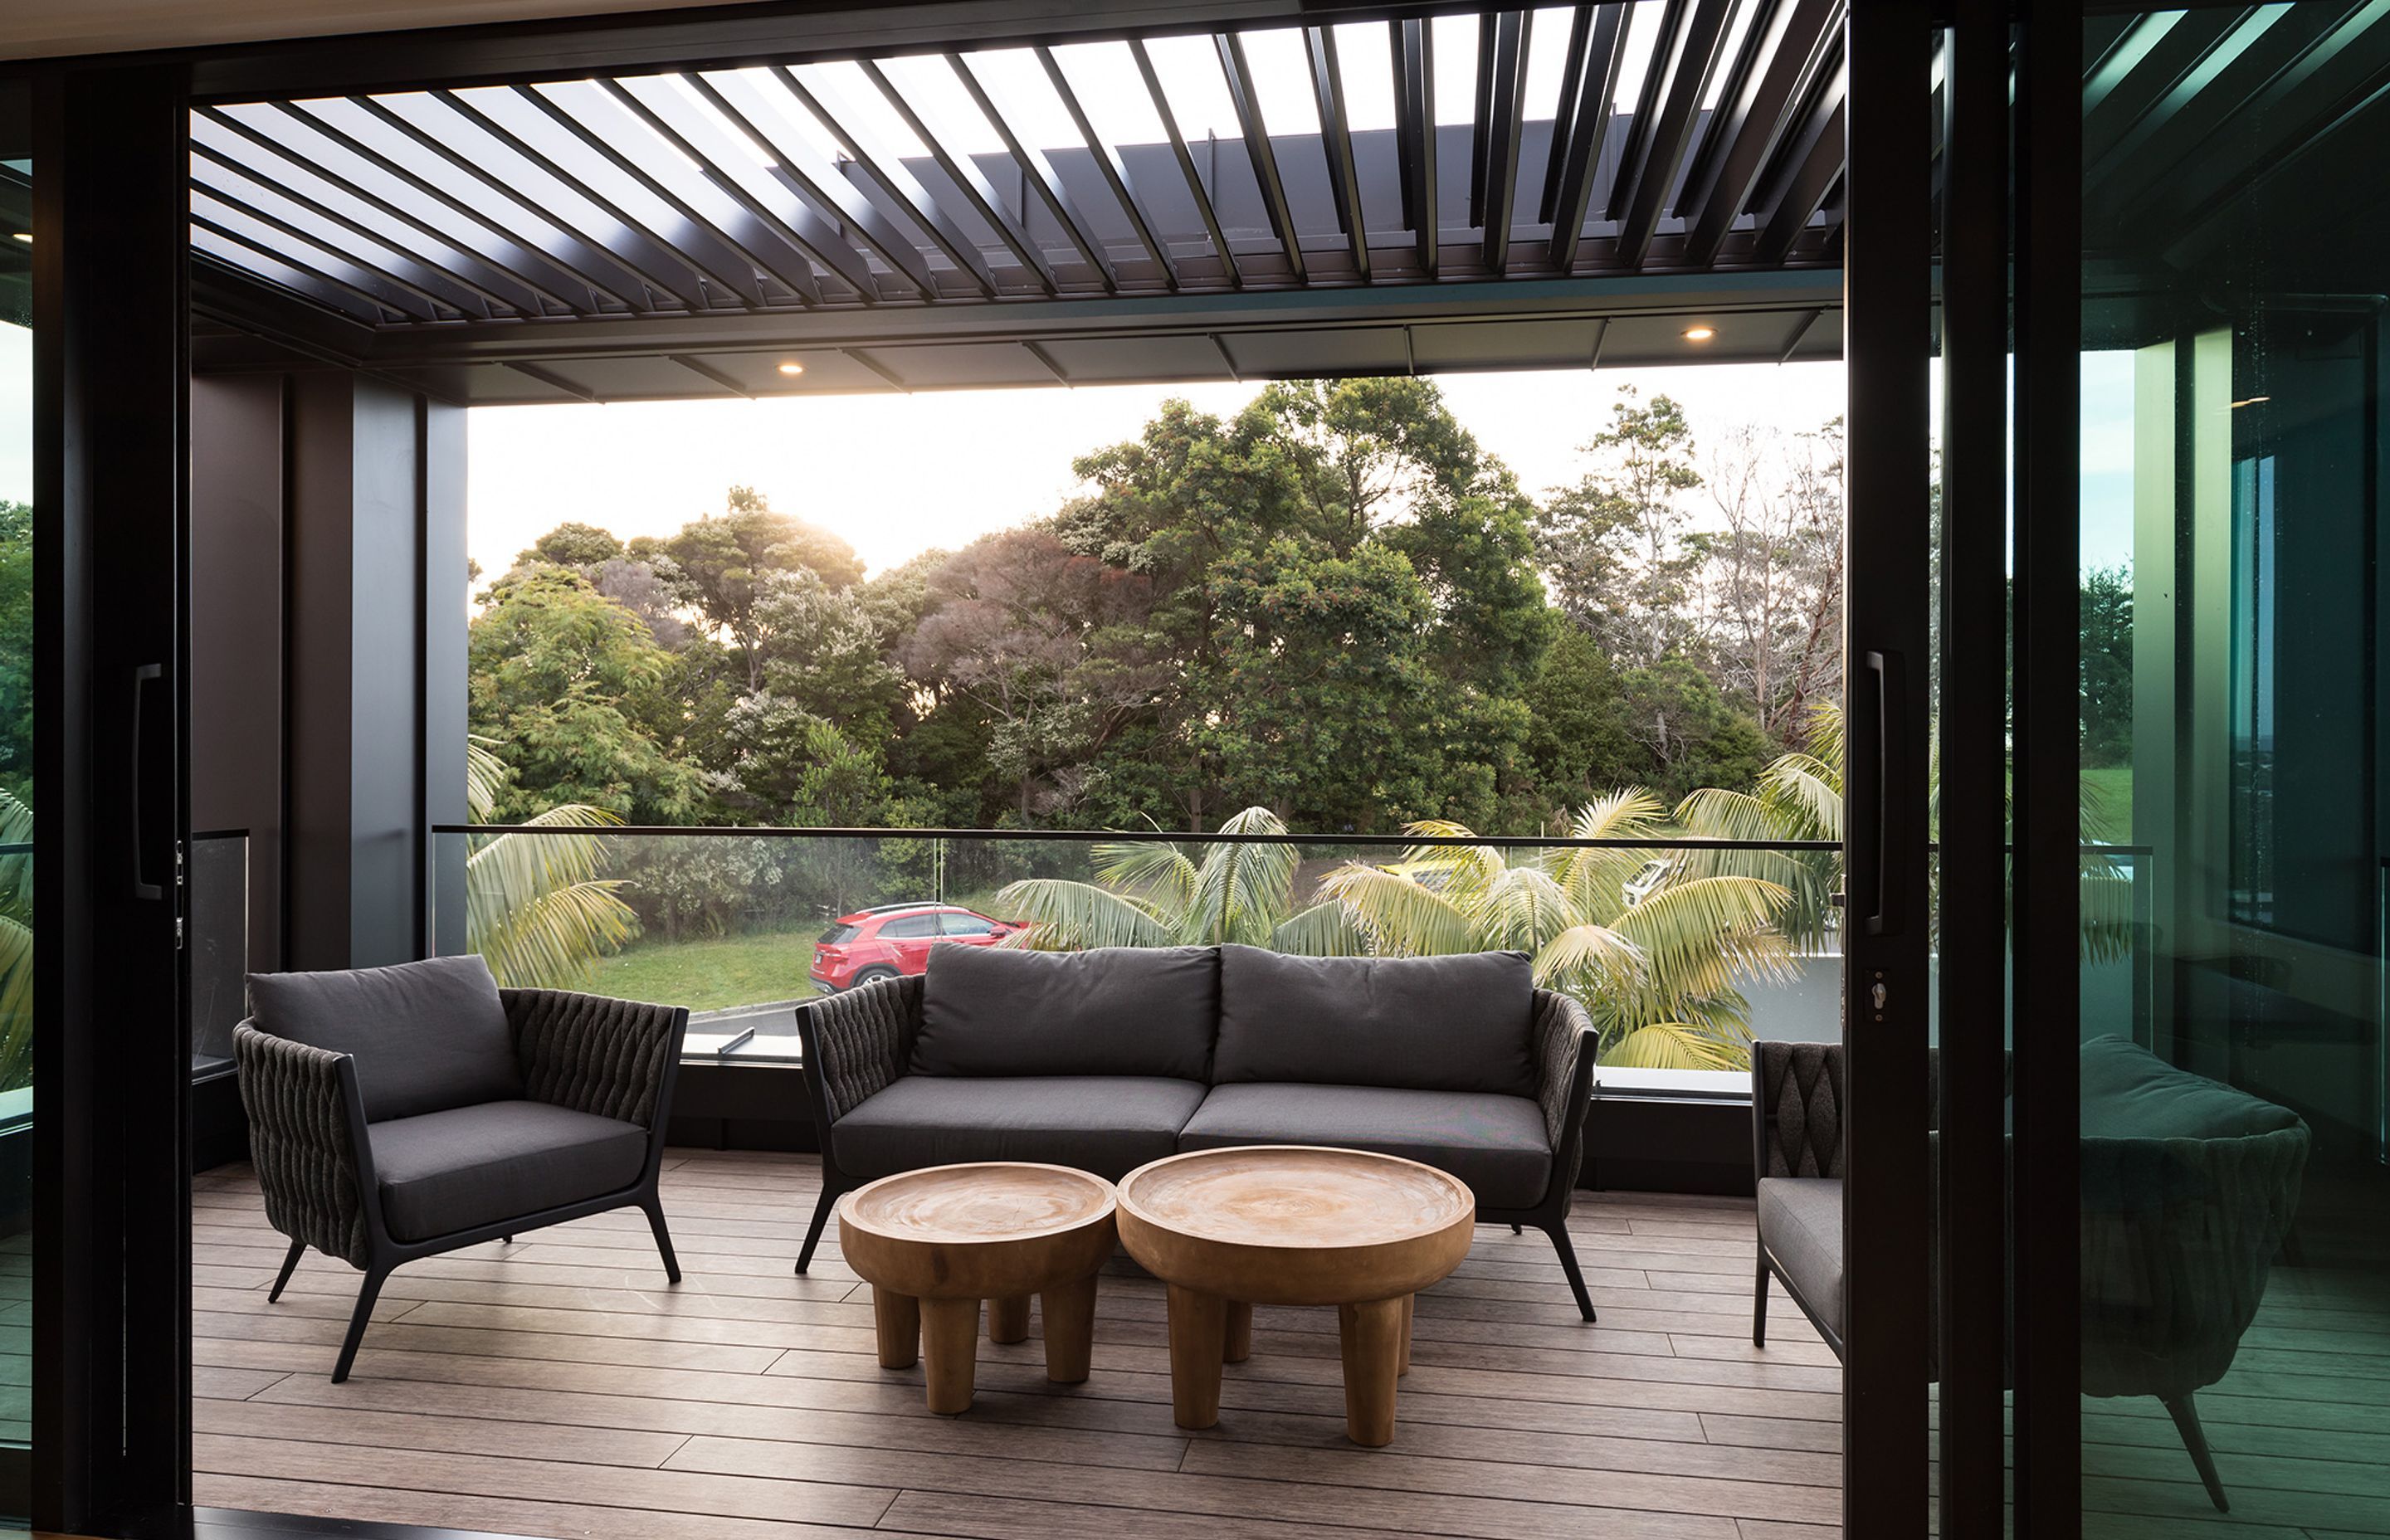 Part of the structural upgrades to the property included substantial foundations and steel beams to accommodate the new outdoor room, which is cantilevered out from the living area.